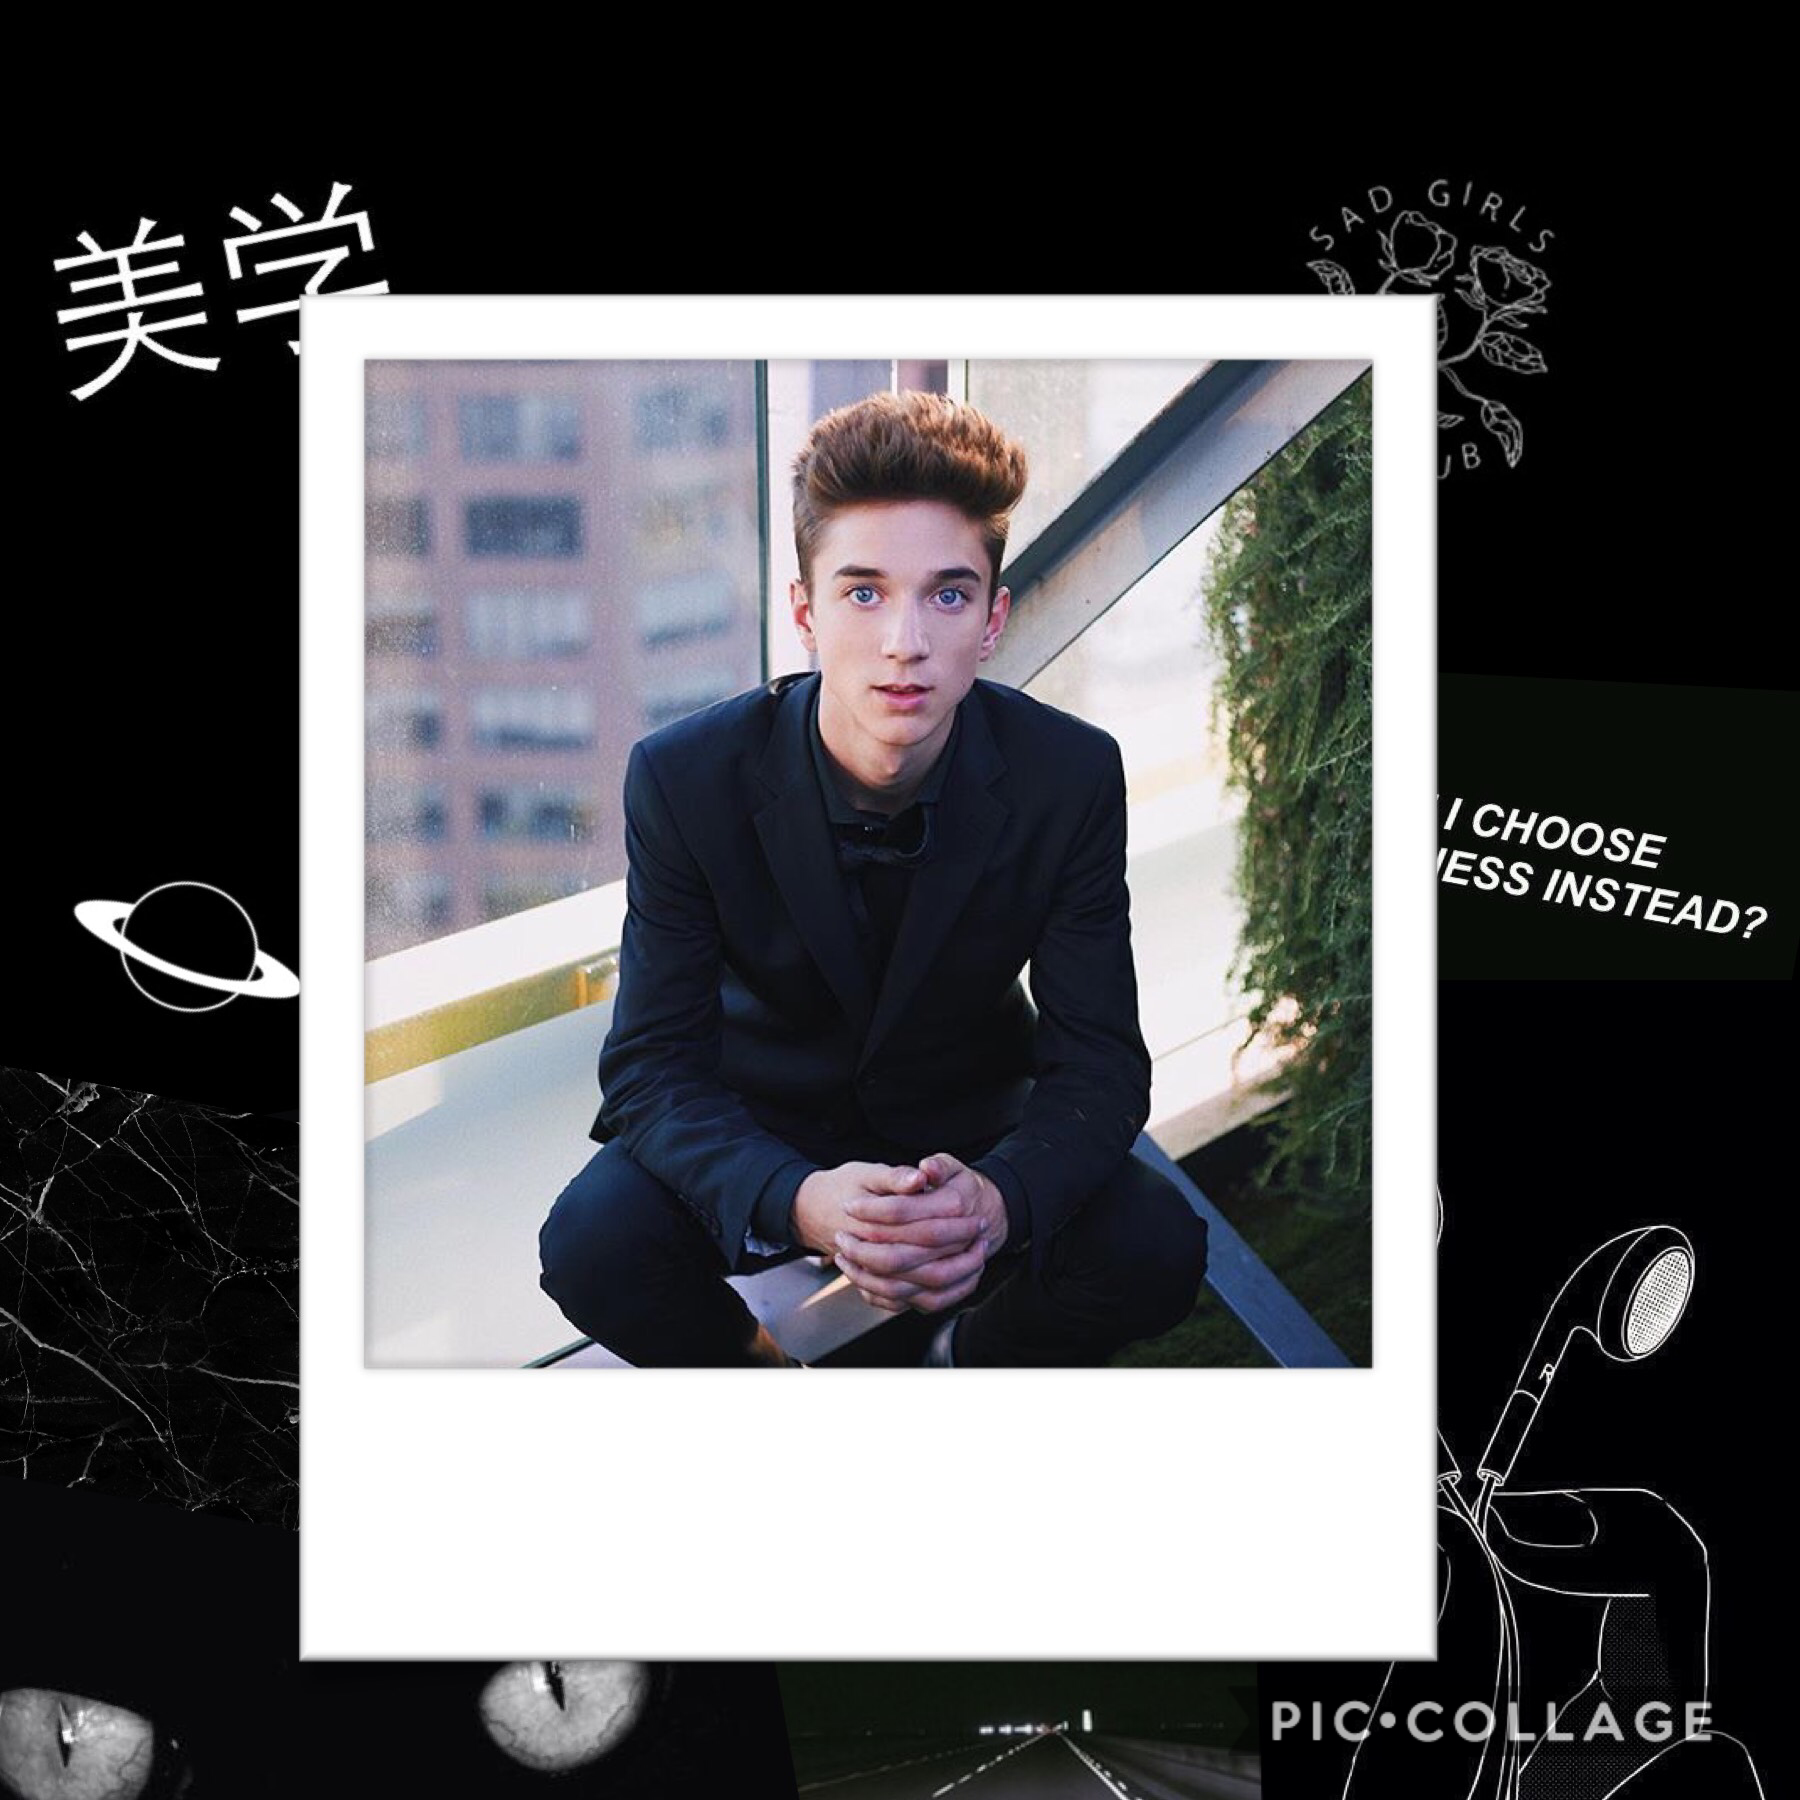 Tap
I know the dude in the frame is different 😂. I made a new set of rainbow ones and accidentally deleted the jung-kook ones. So, this is Daniel Seavey, who’s part of boy band “Why Don’t We”. They are epic , so please go check them out. Stay positive y’a